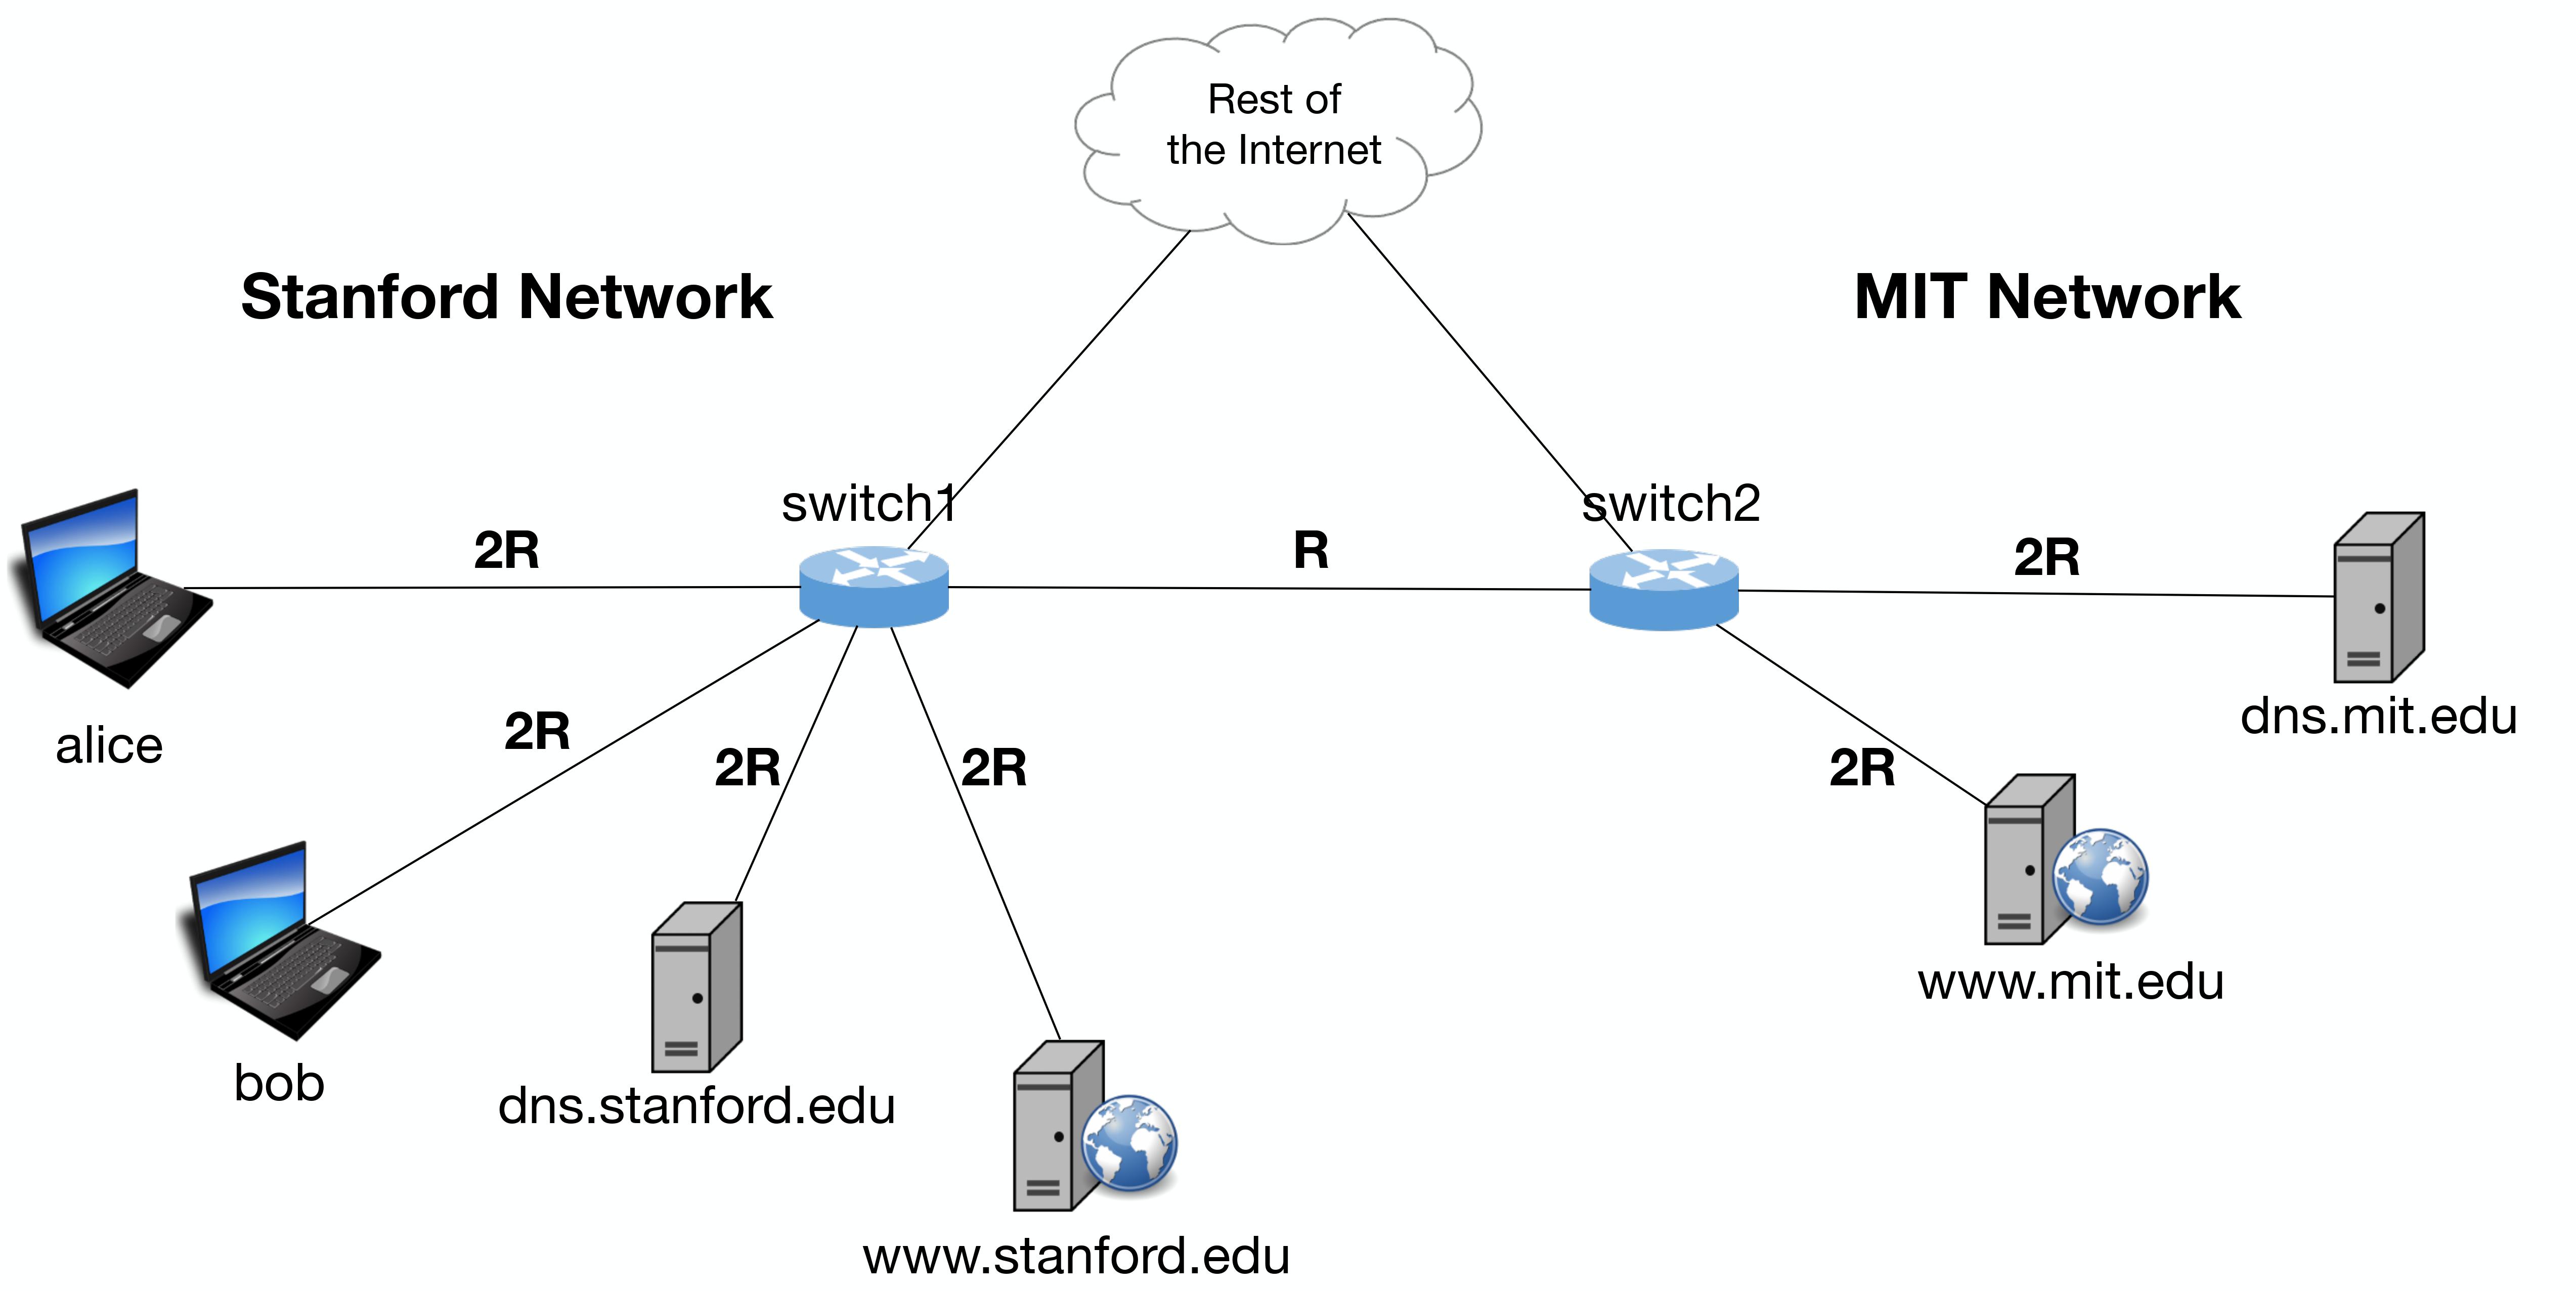 Network topology